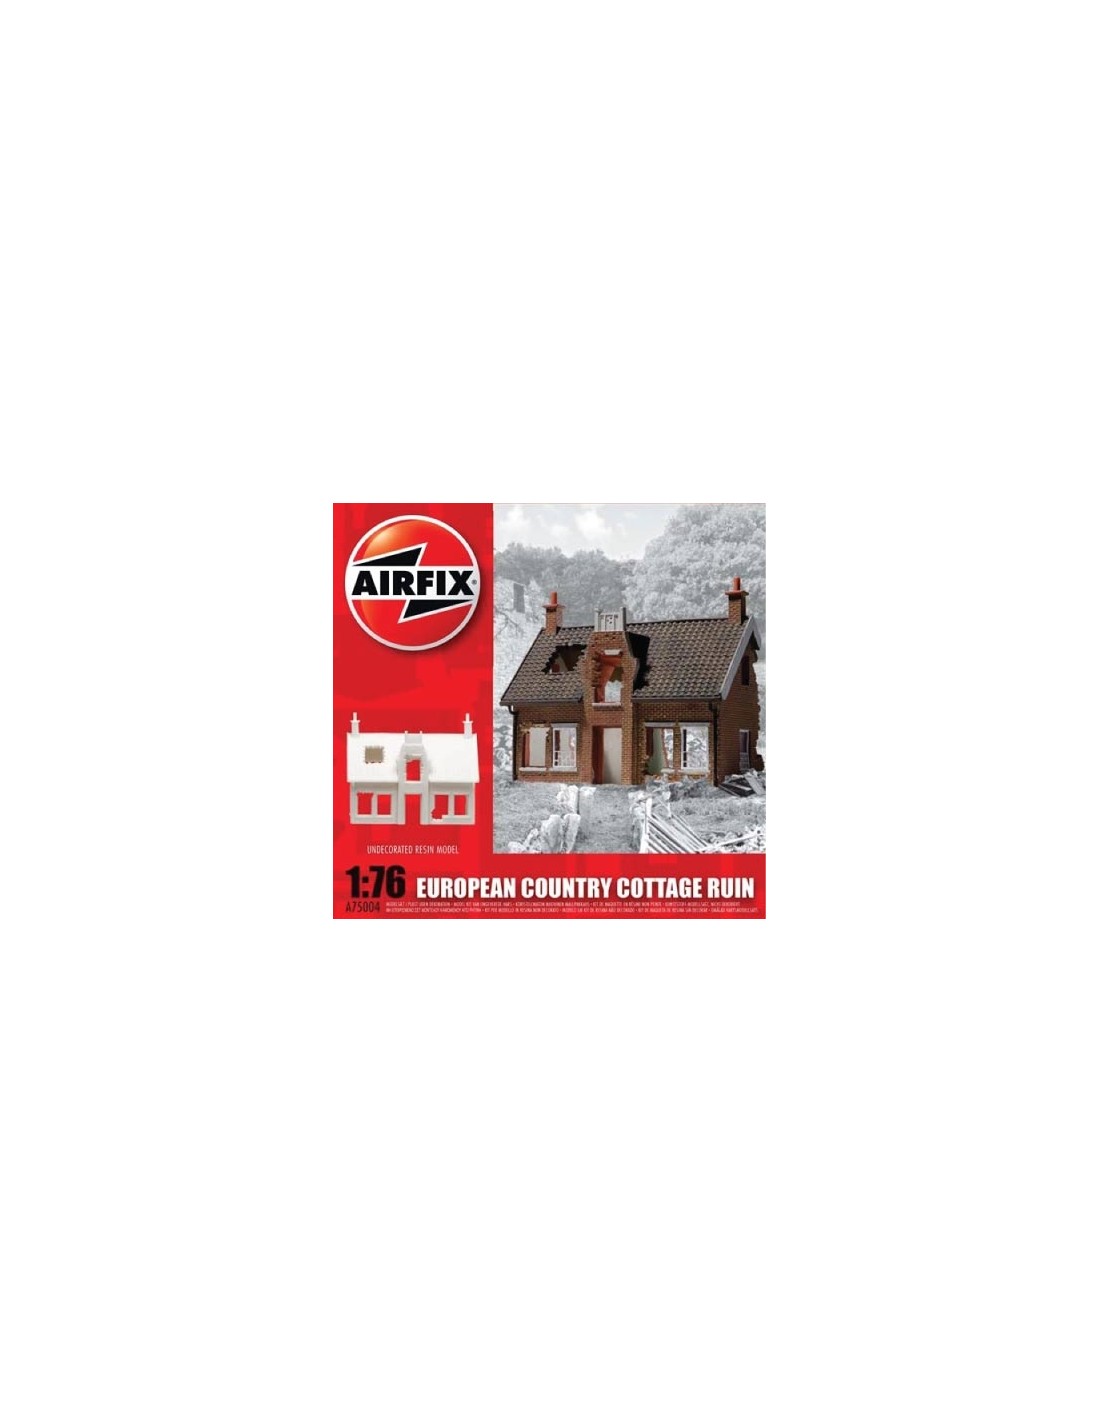 AIRFIX European Country Cottage Ruin Country House Ruins Resin 1:76 Item A75004 